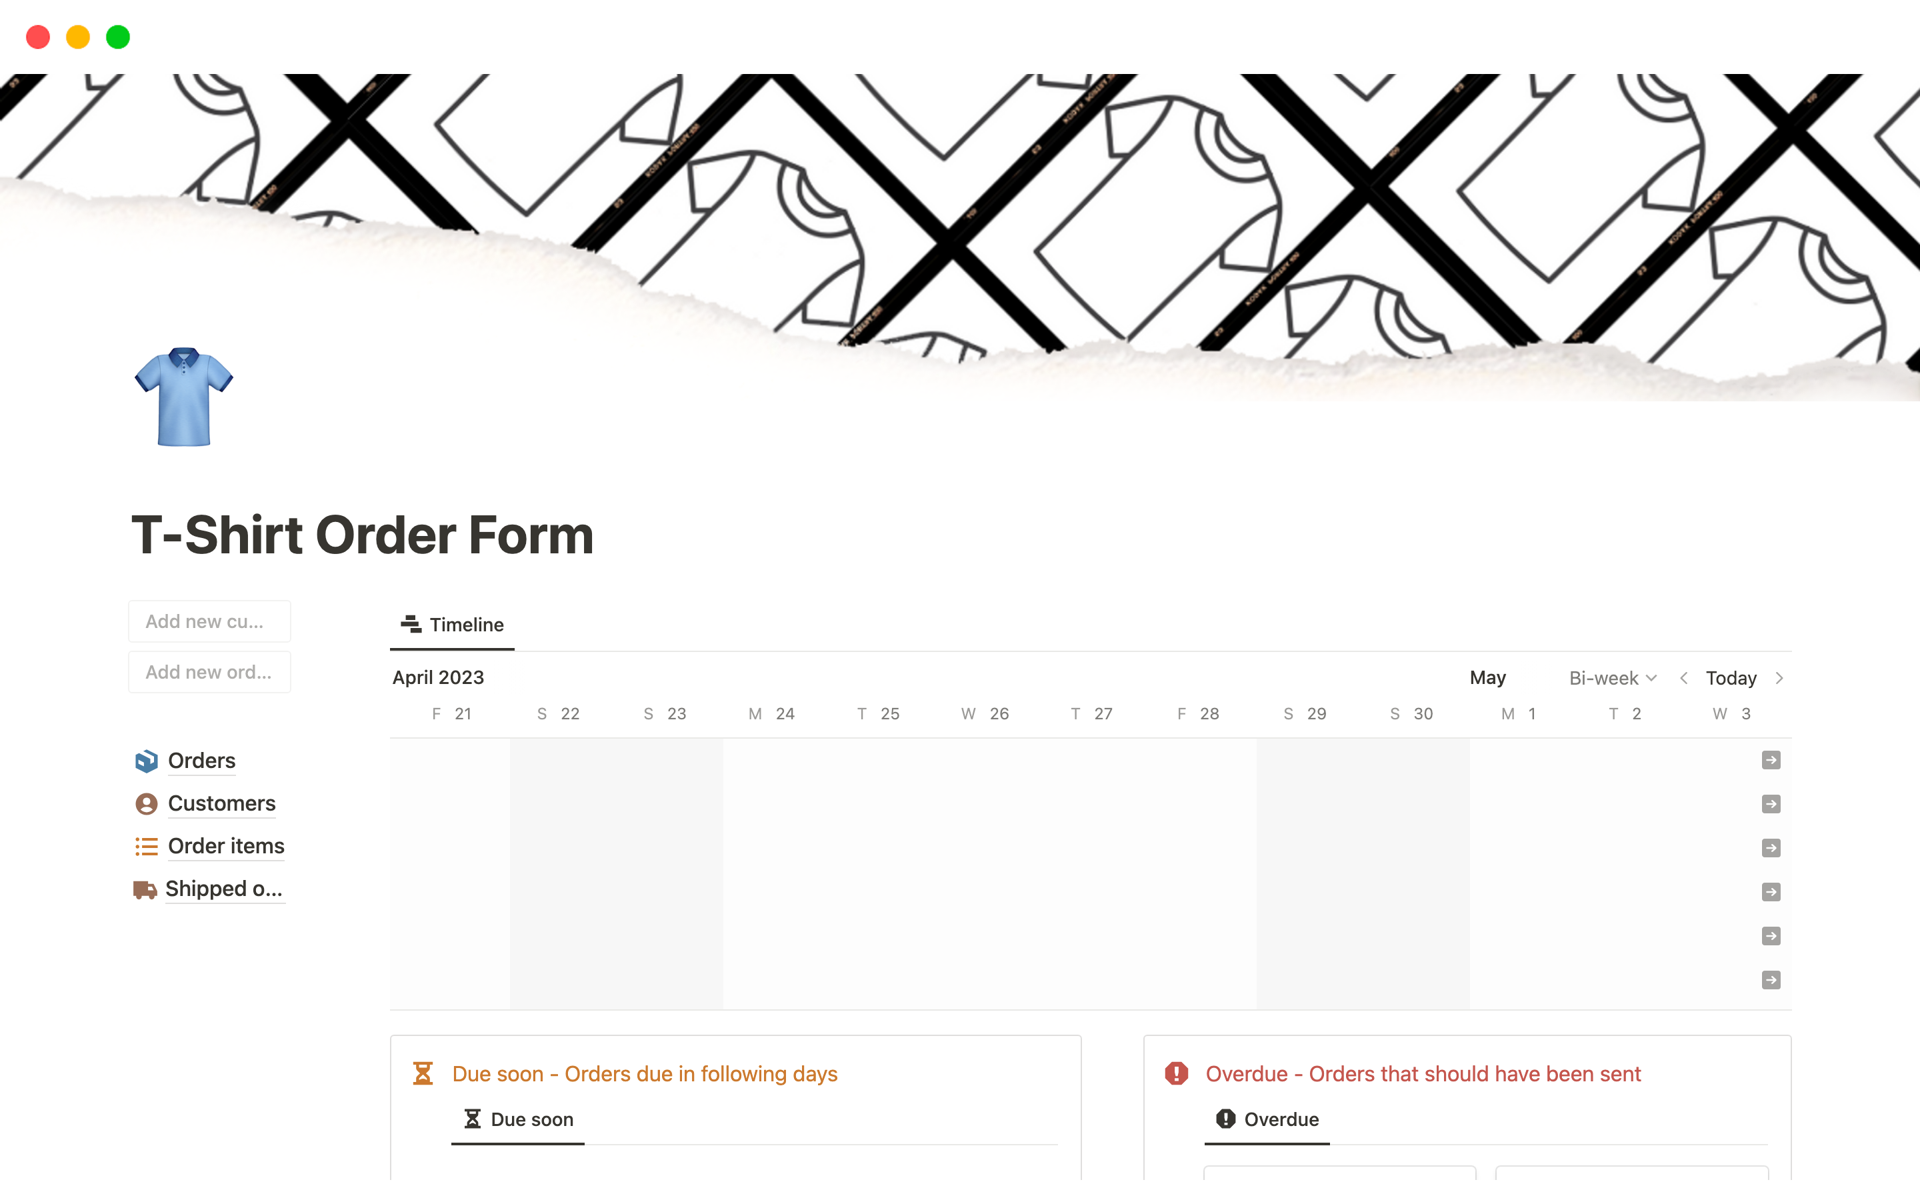 Our template will give you a clear overview of all your custom orders, customers, and order statuses. No more missed due dates, no more guesswork.